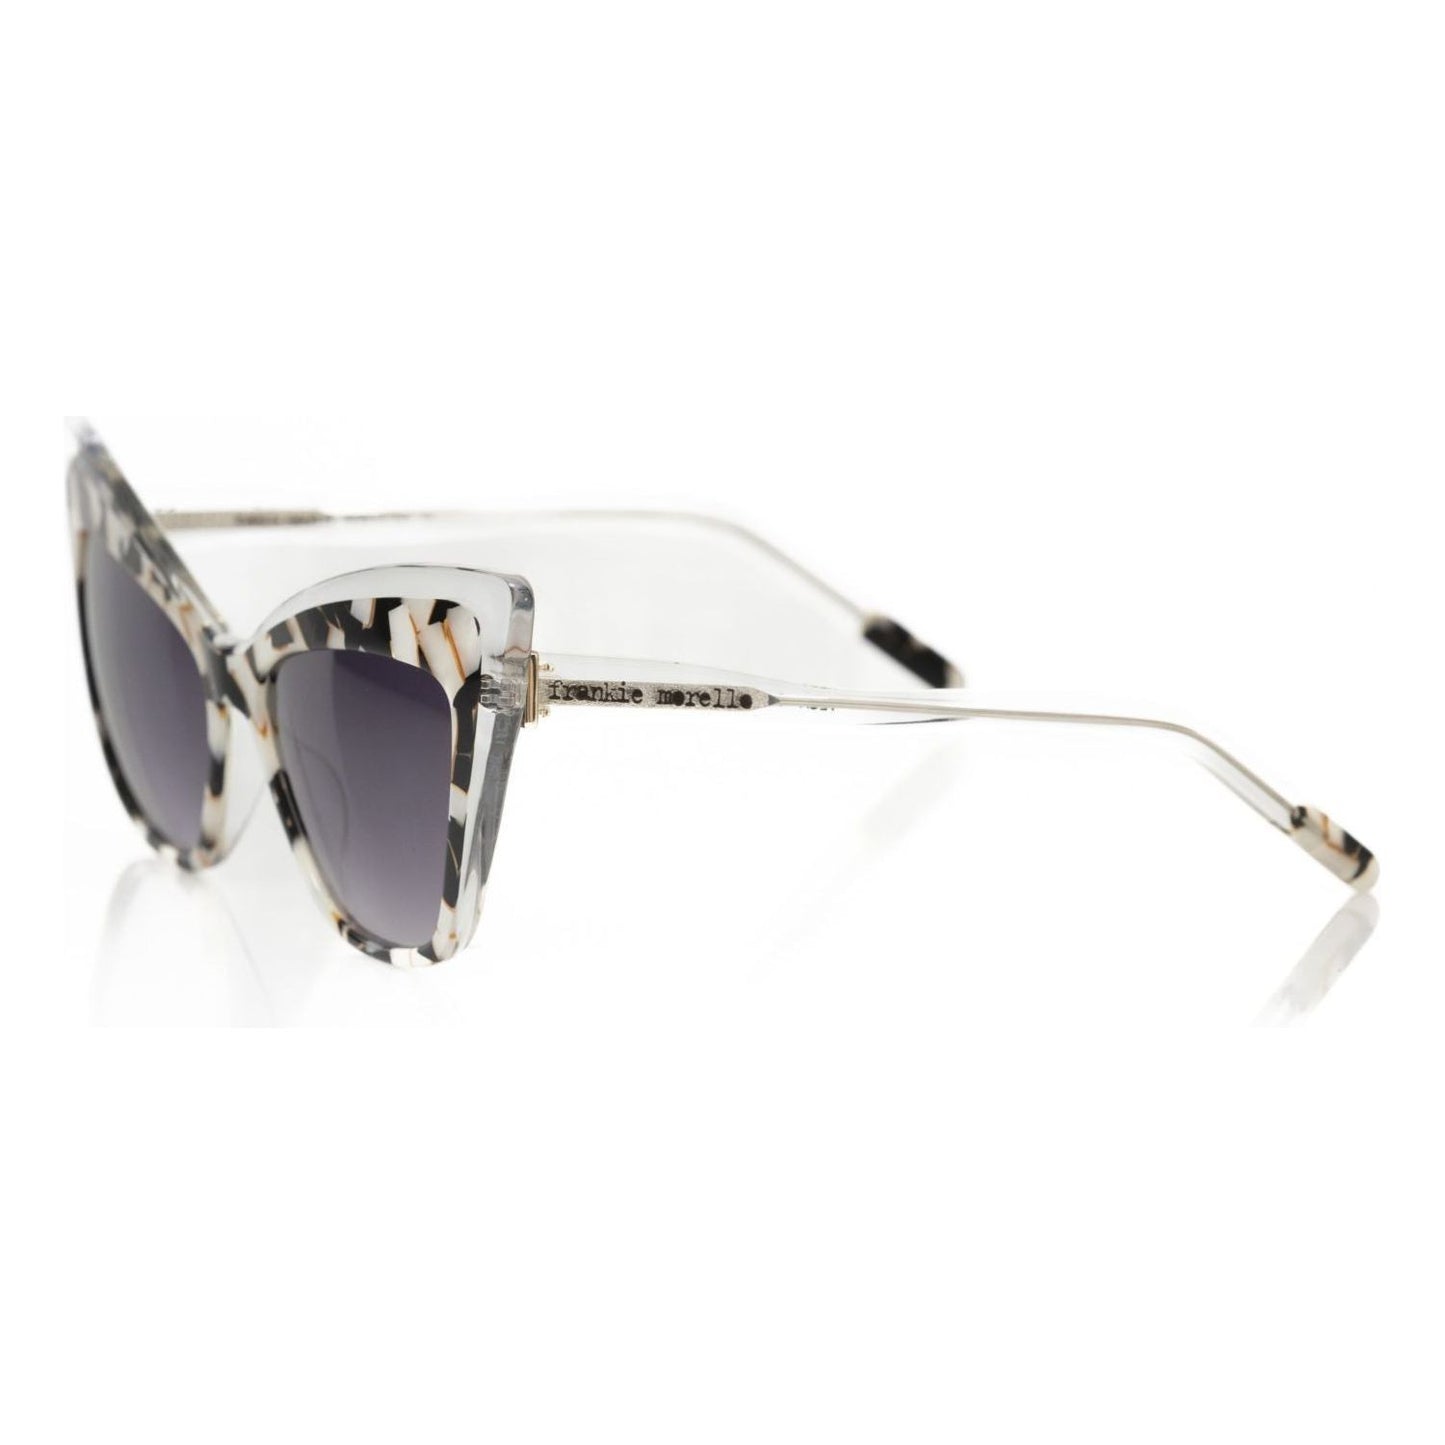 Frankie Morello Chic Cat Eye Sunglasses with Pearly Accent multicolor-acetate-sunglasses